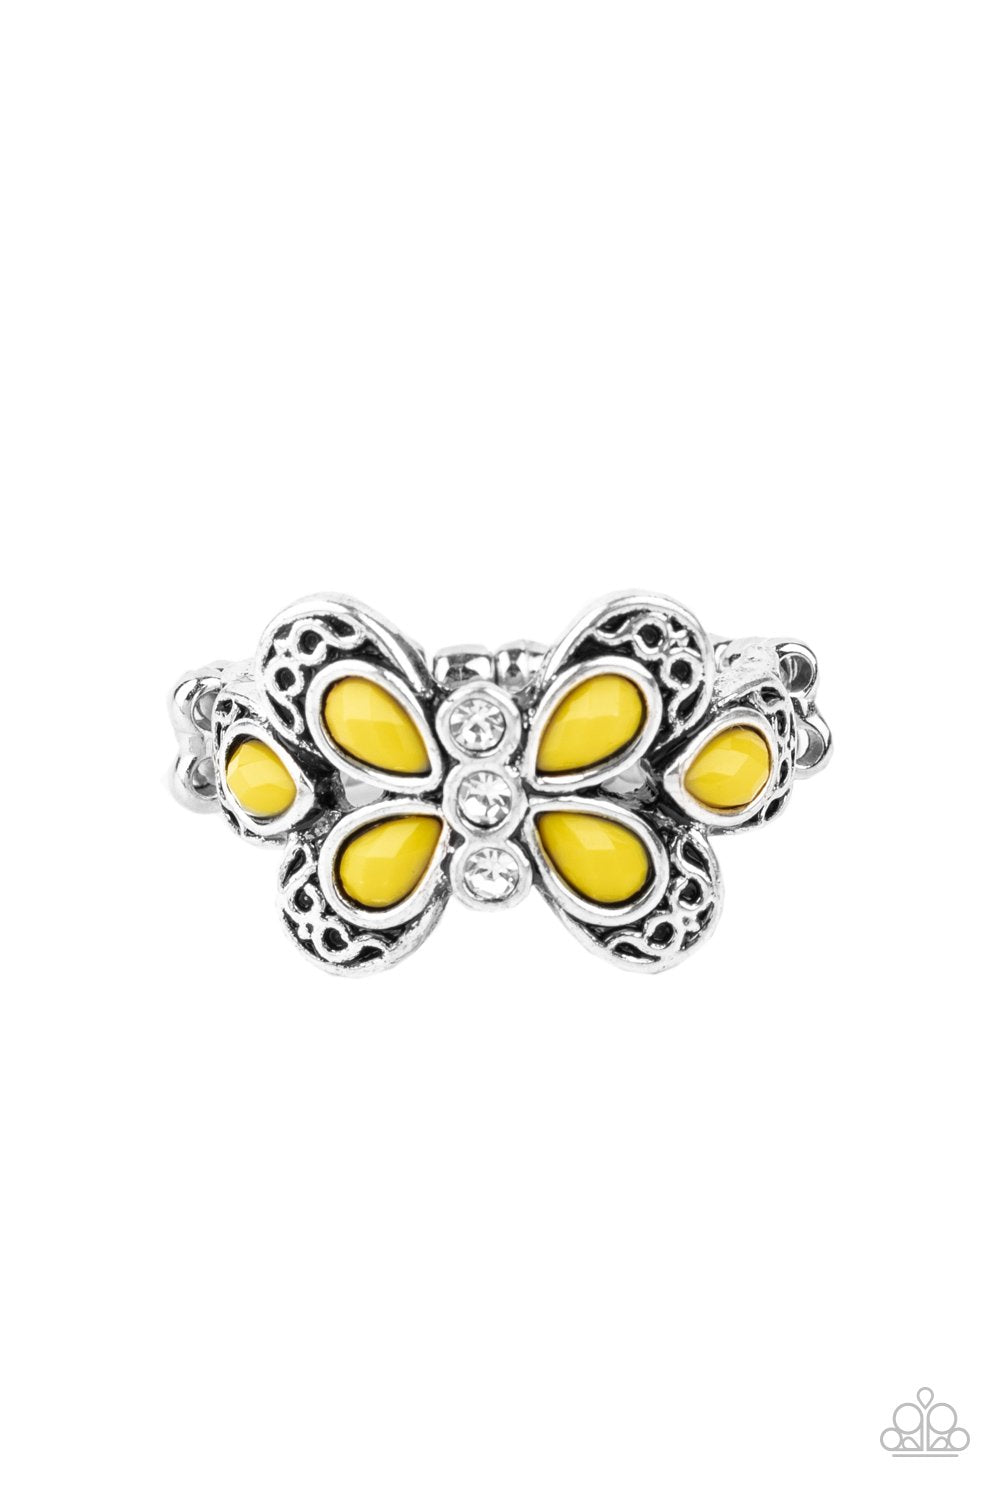 Boho Butterfly Yellow and White Ring - Paparazzi Accessories - lightbox -CarasShop.com - $5 Jewelry by Cara Jewels